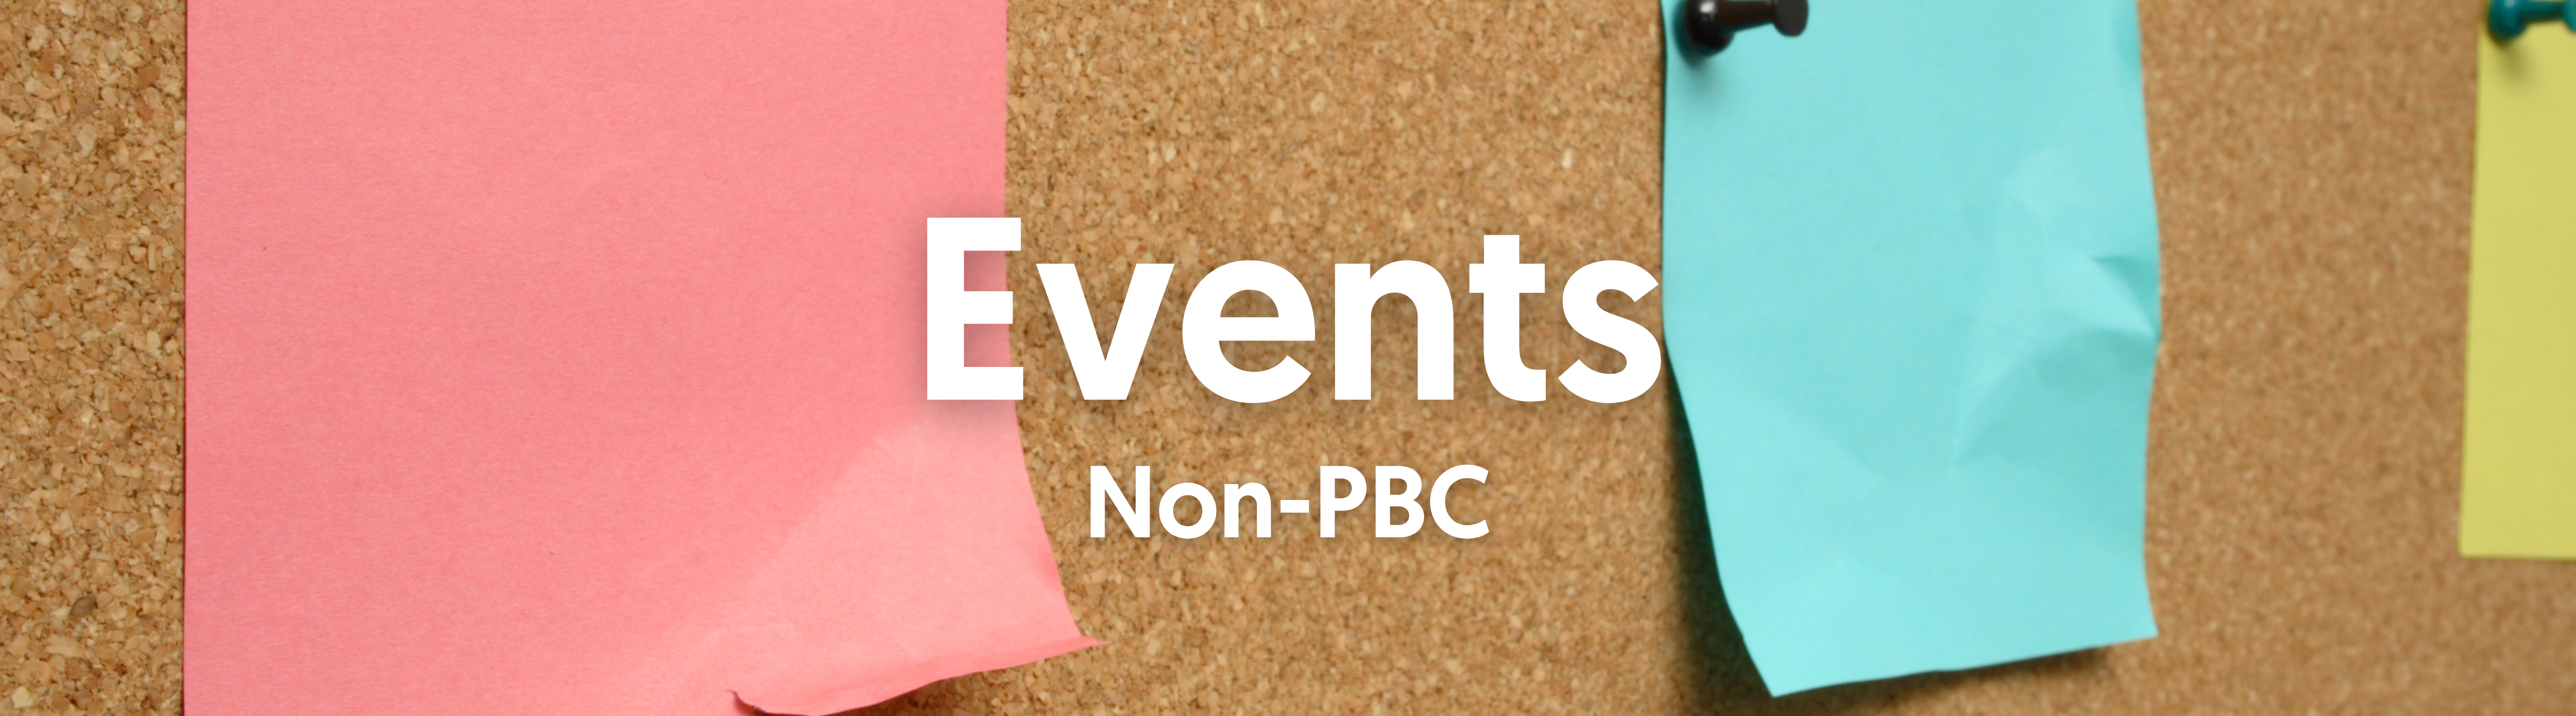 Purley Week Events non-PBC